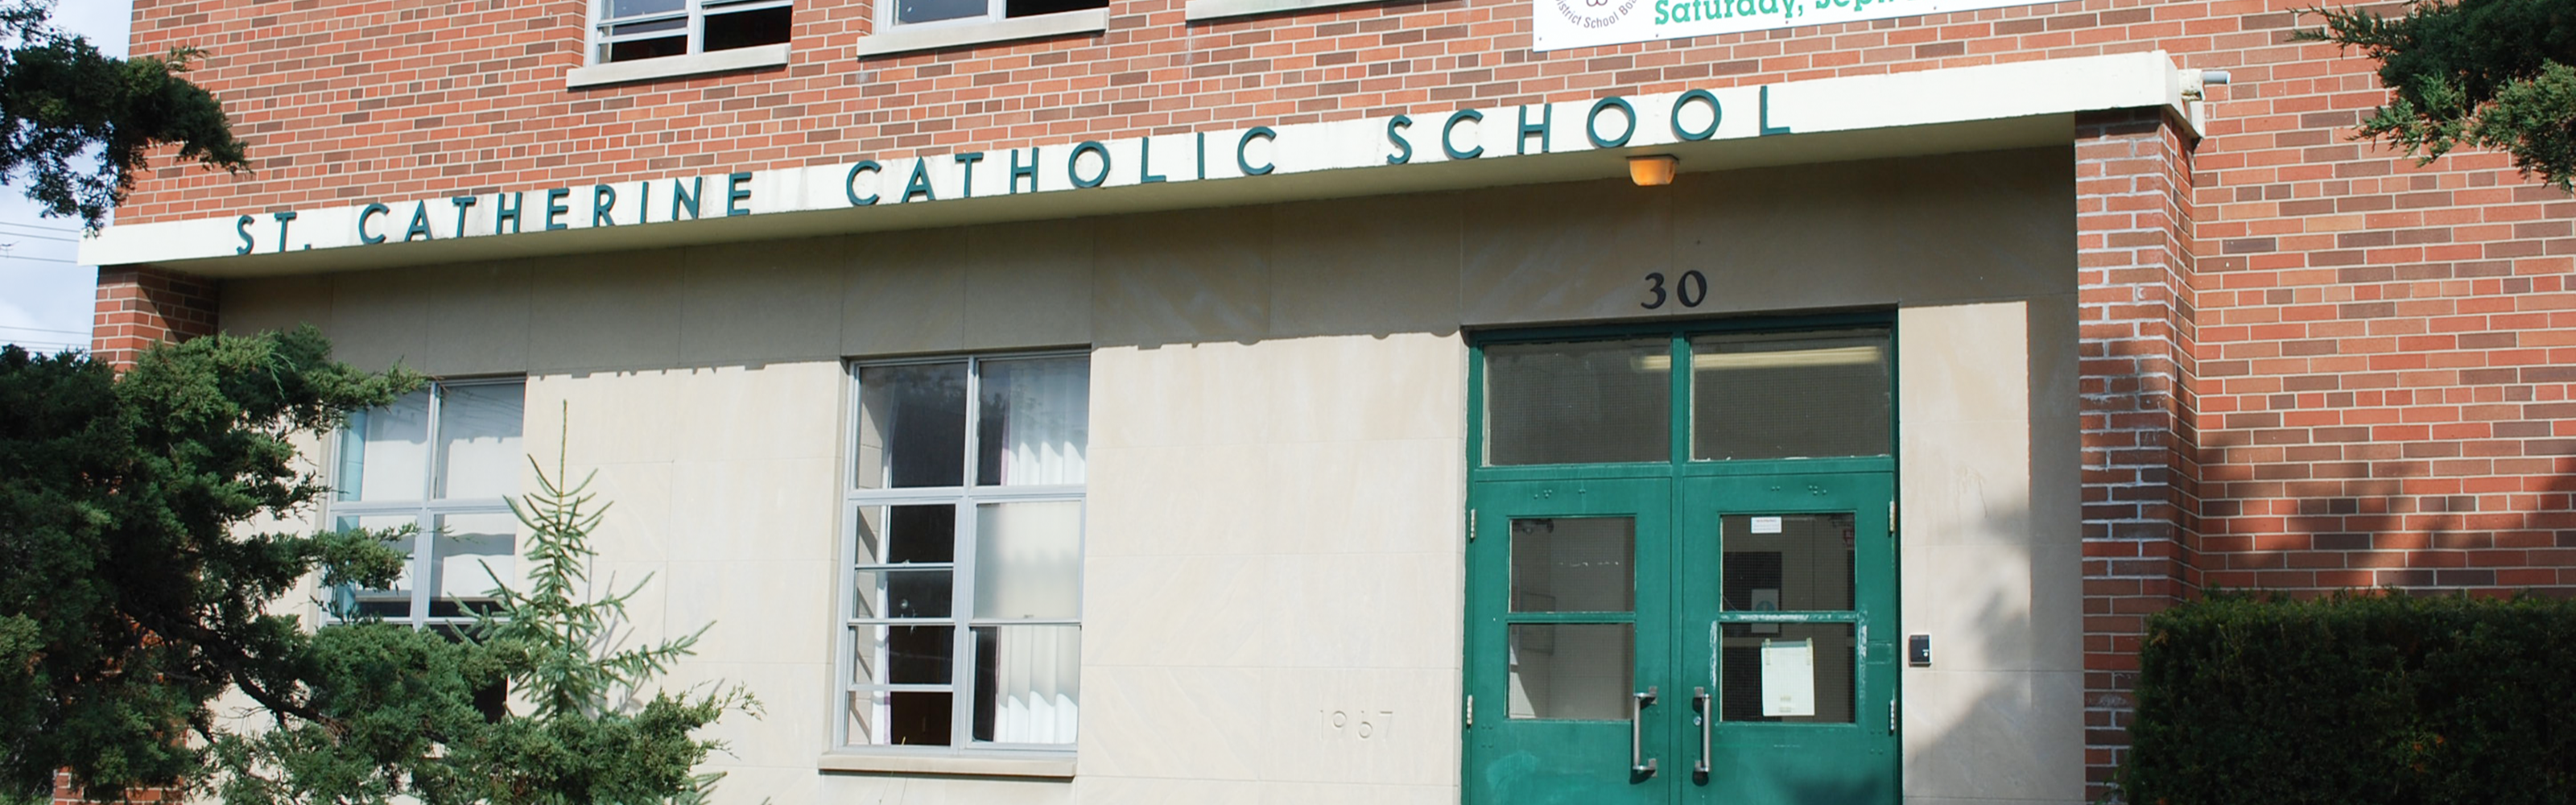 The front of the St. Catherine Catholic School building.